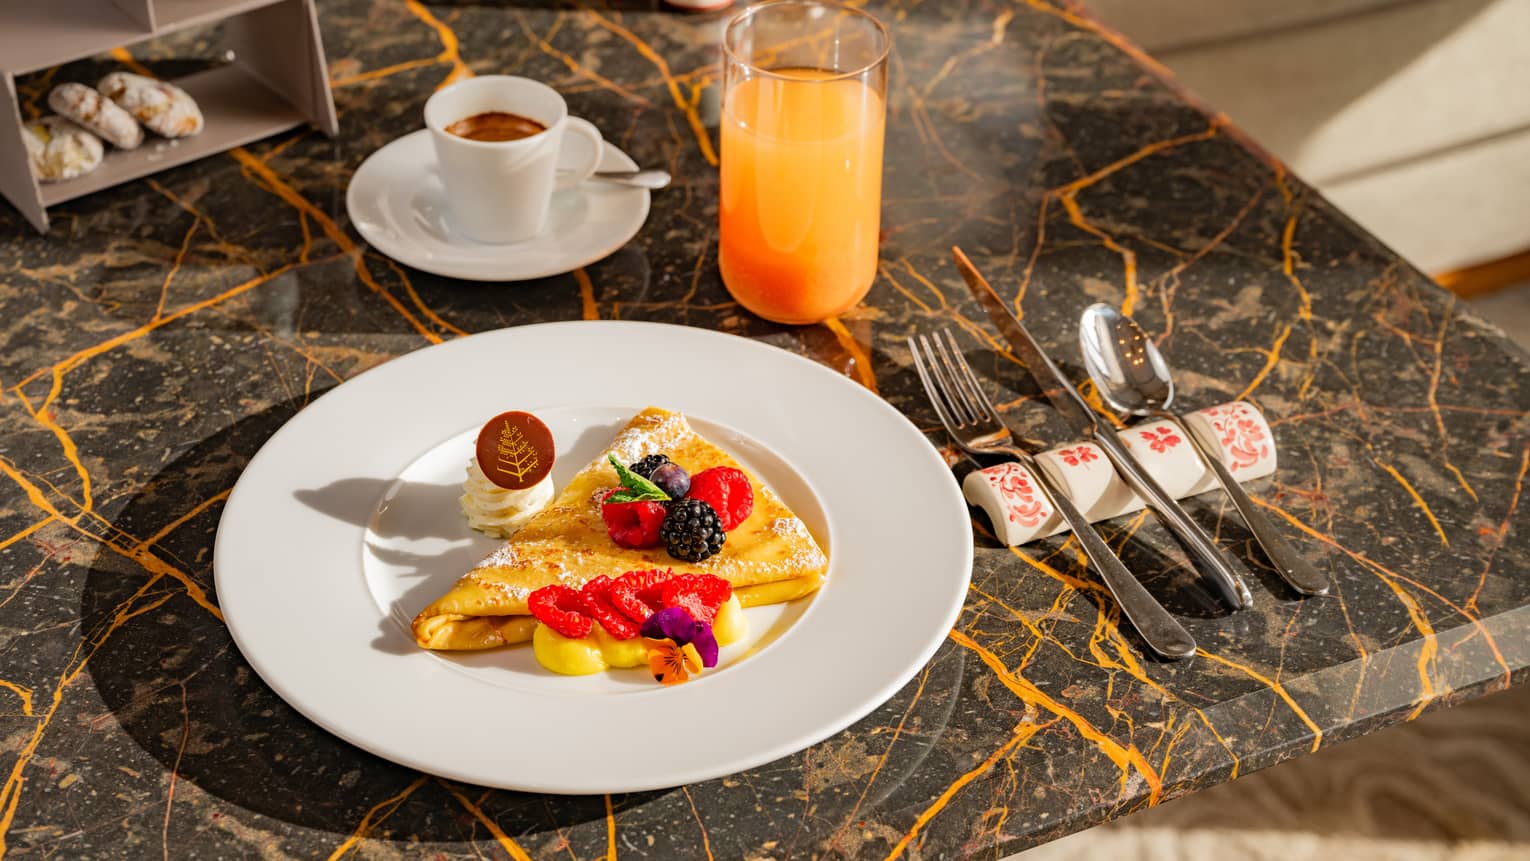 Folded cr�pe topped with mixed berries beside flatware, cup of espresso and glass of juice